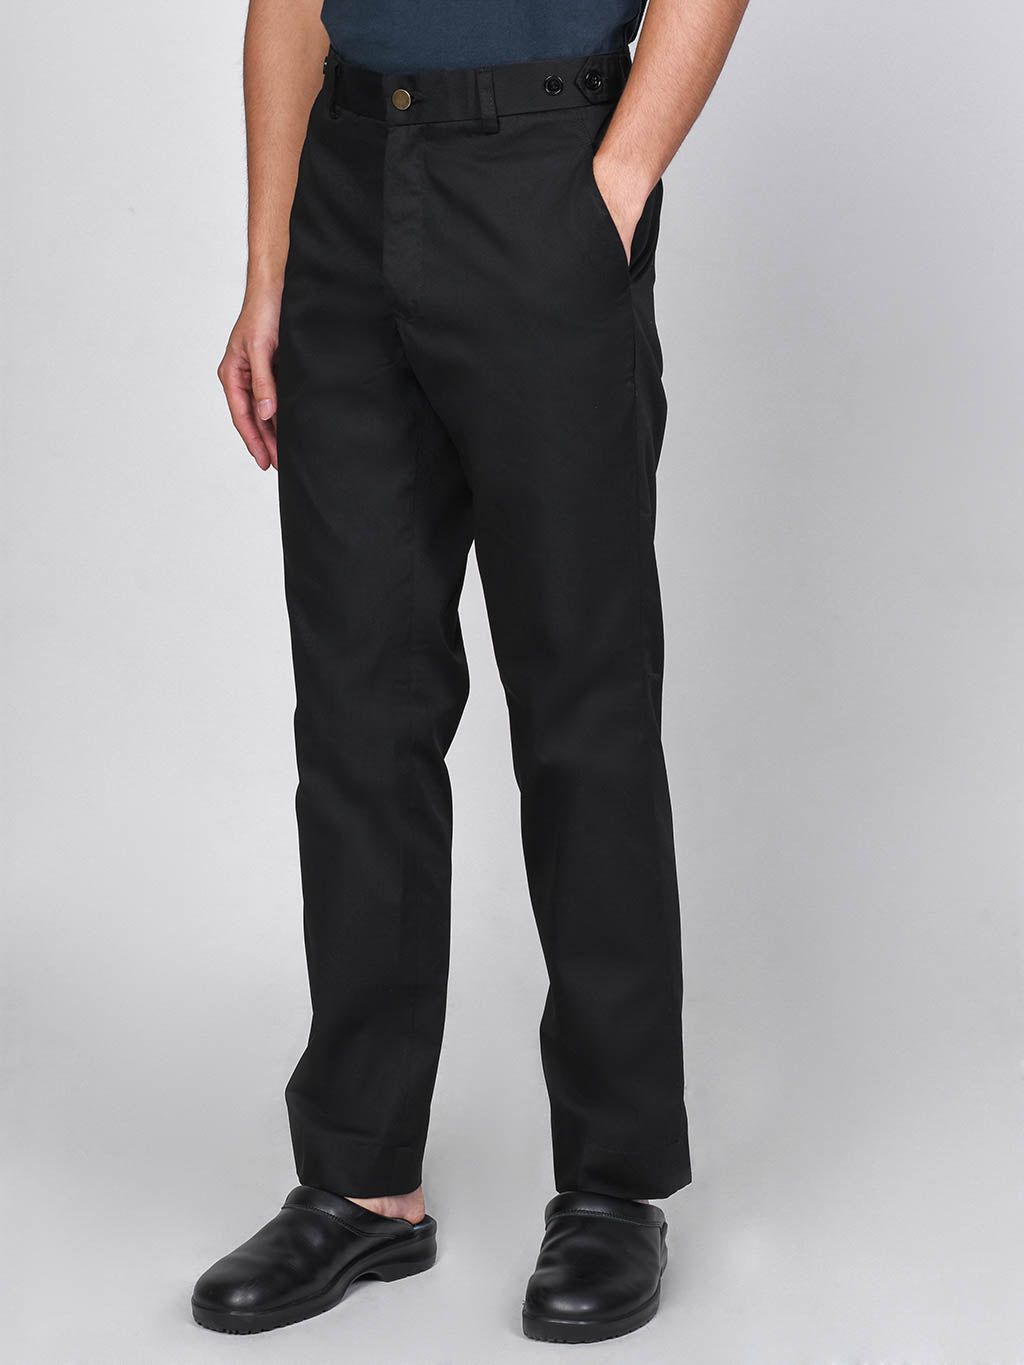 Jacobs Black Chef Trousers